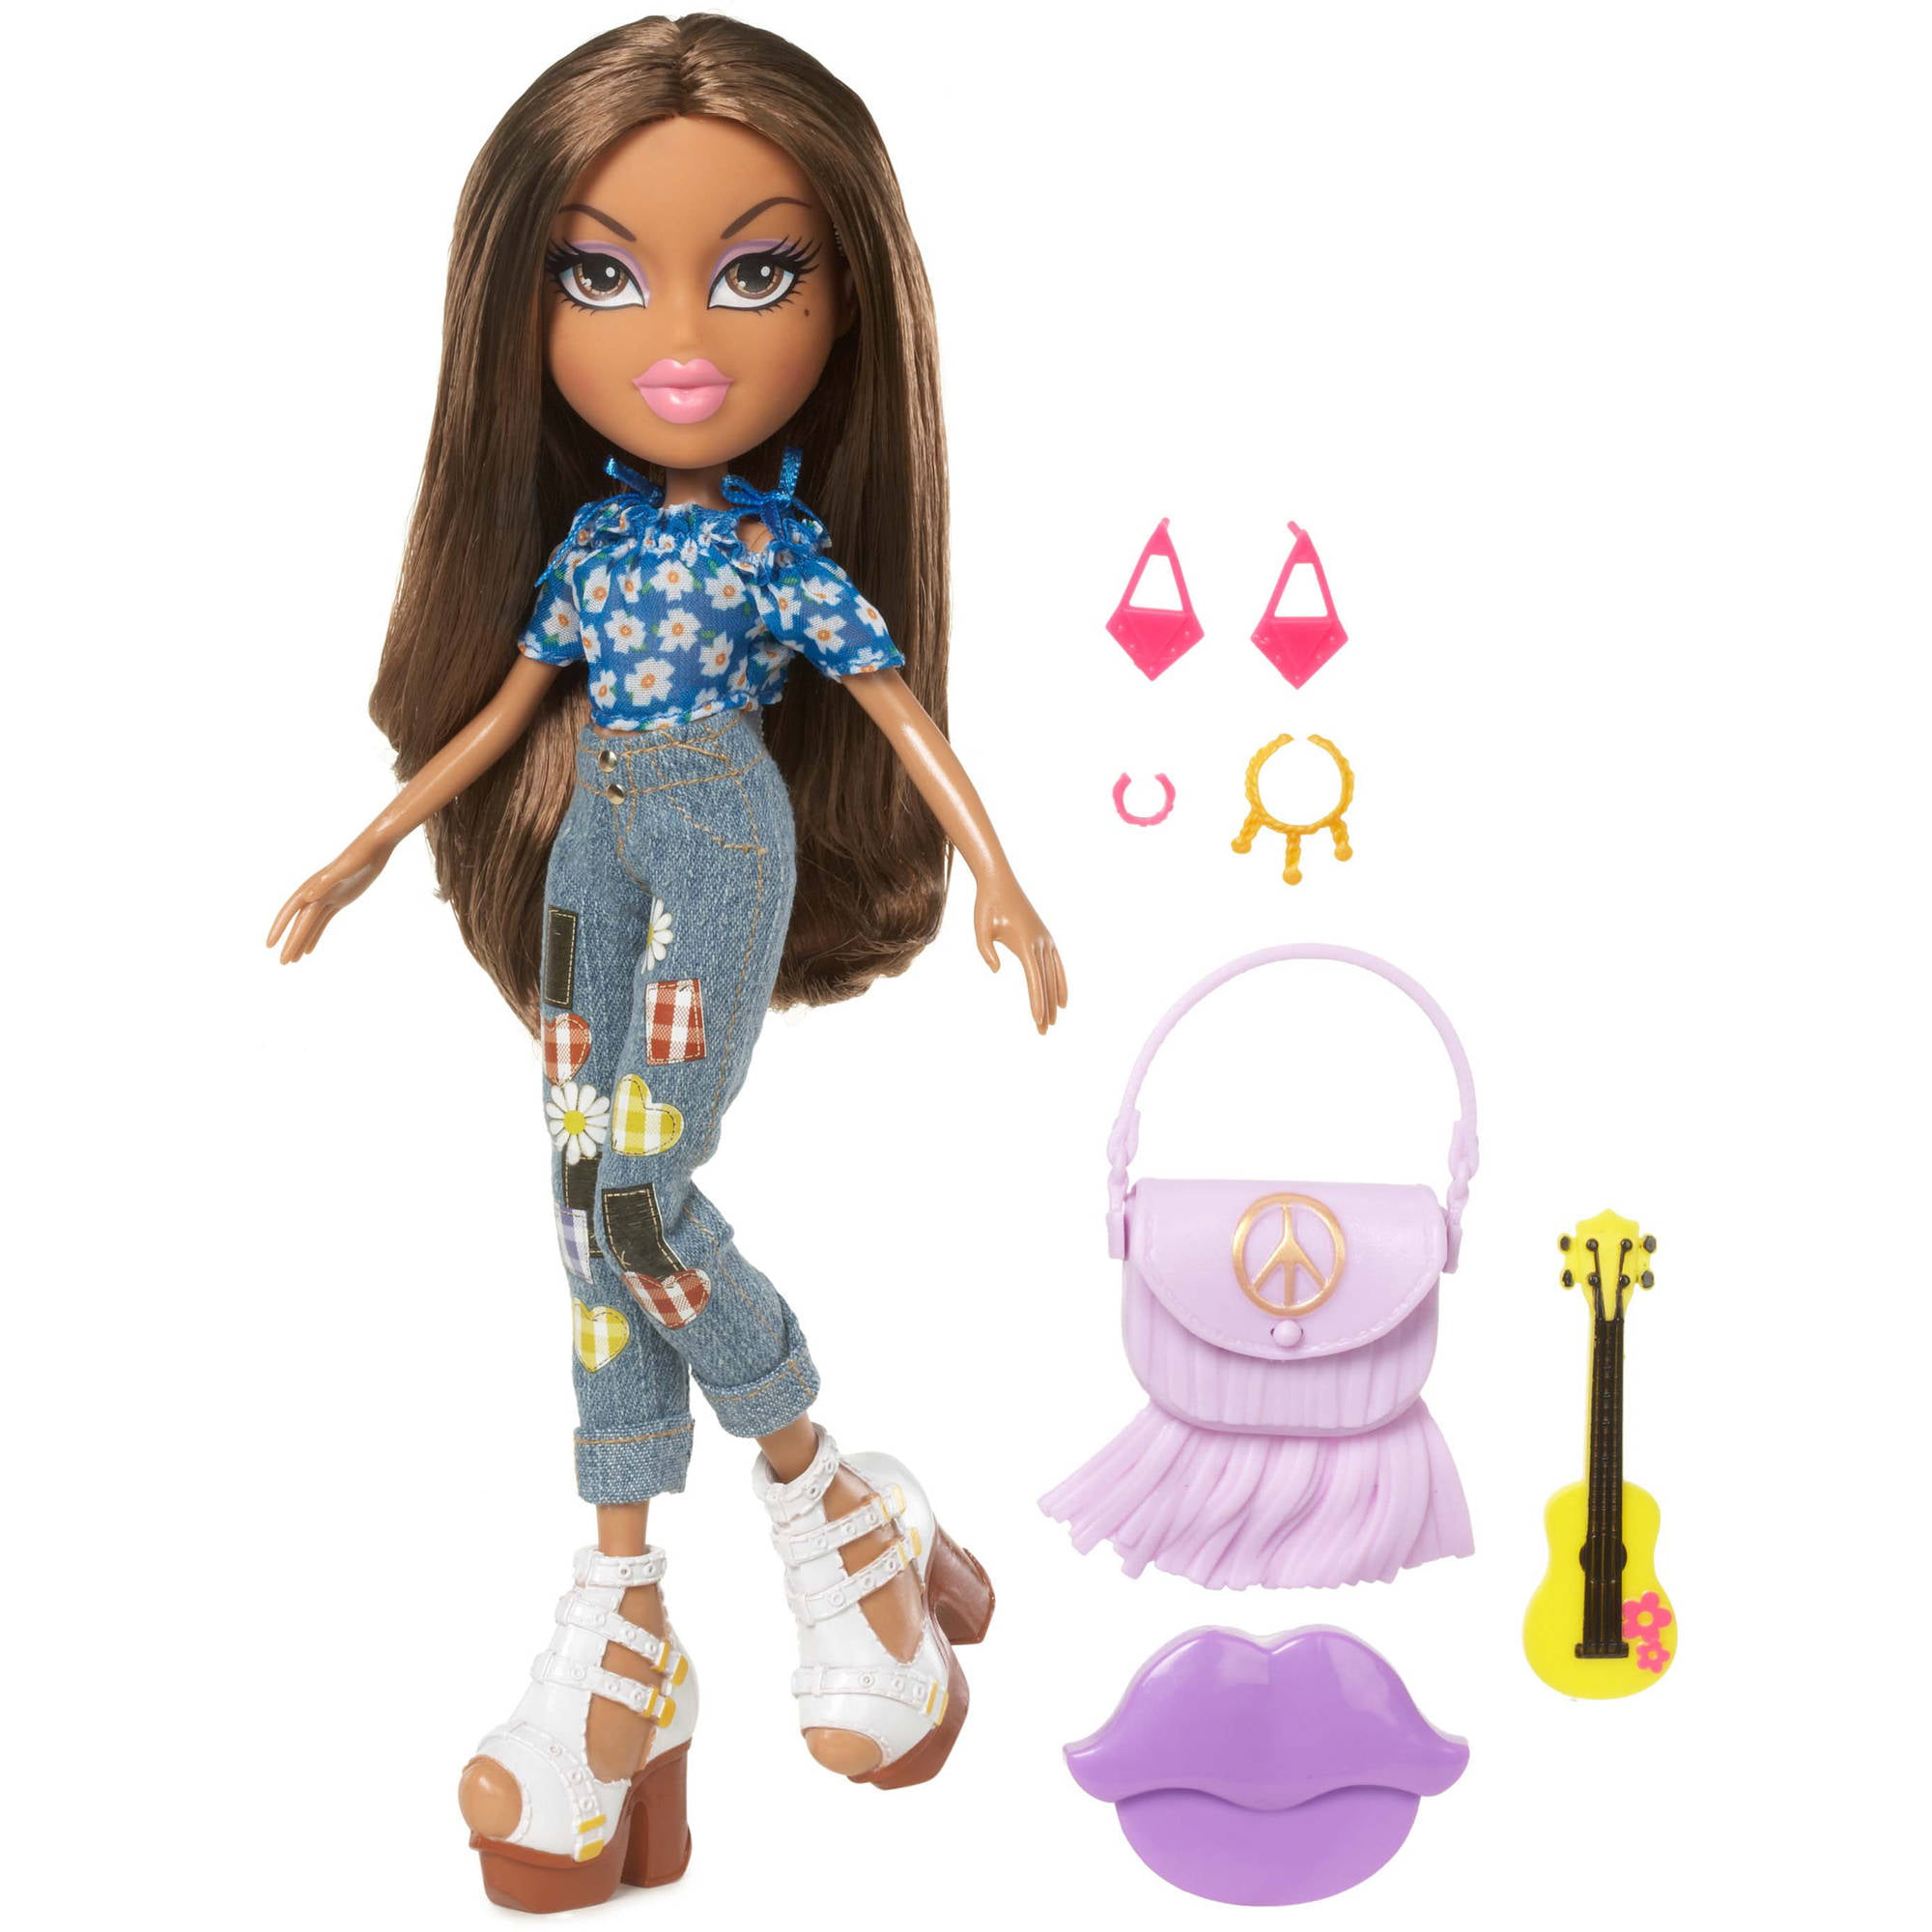 NEW Bratz Hello My Name Is Doll Cameron WITH ACCESSORIES 